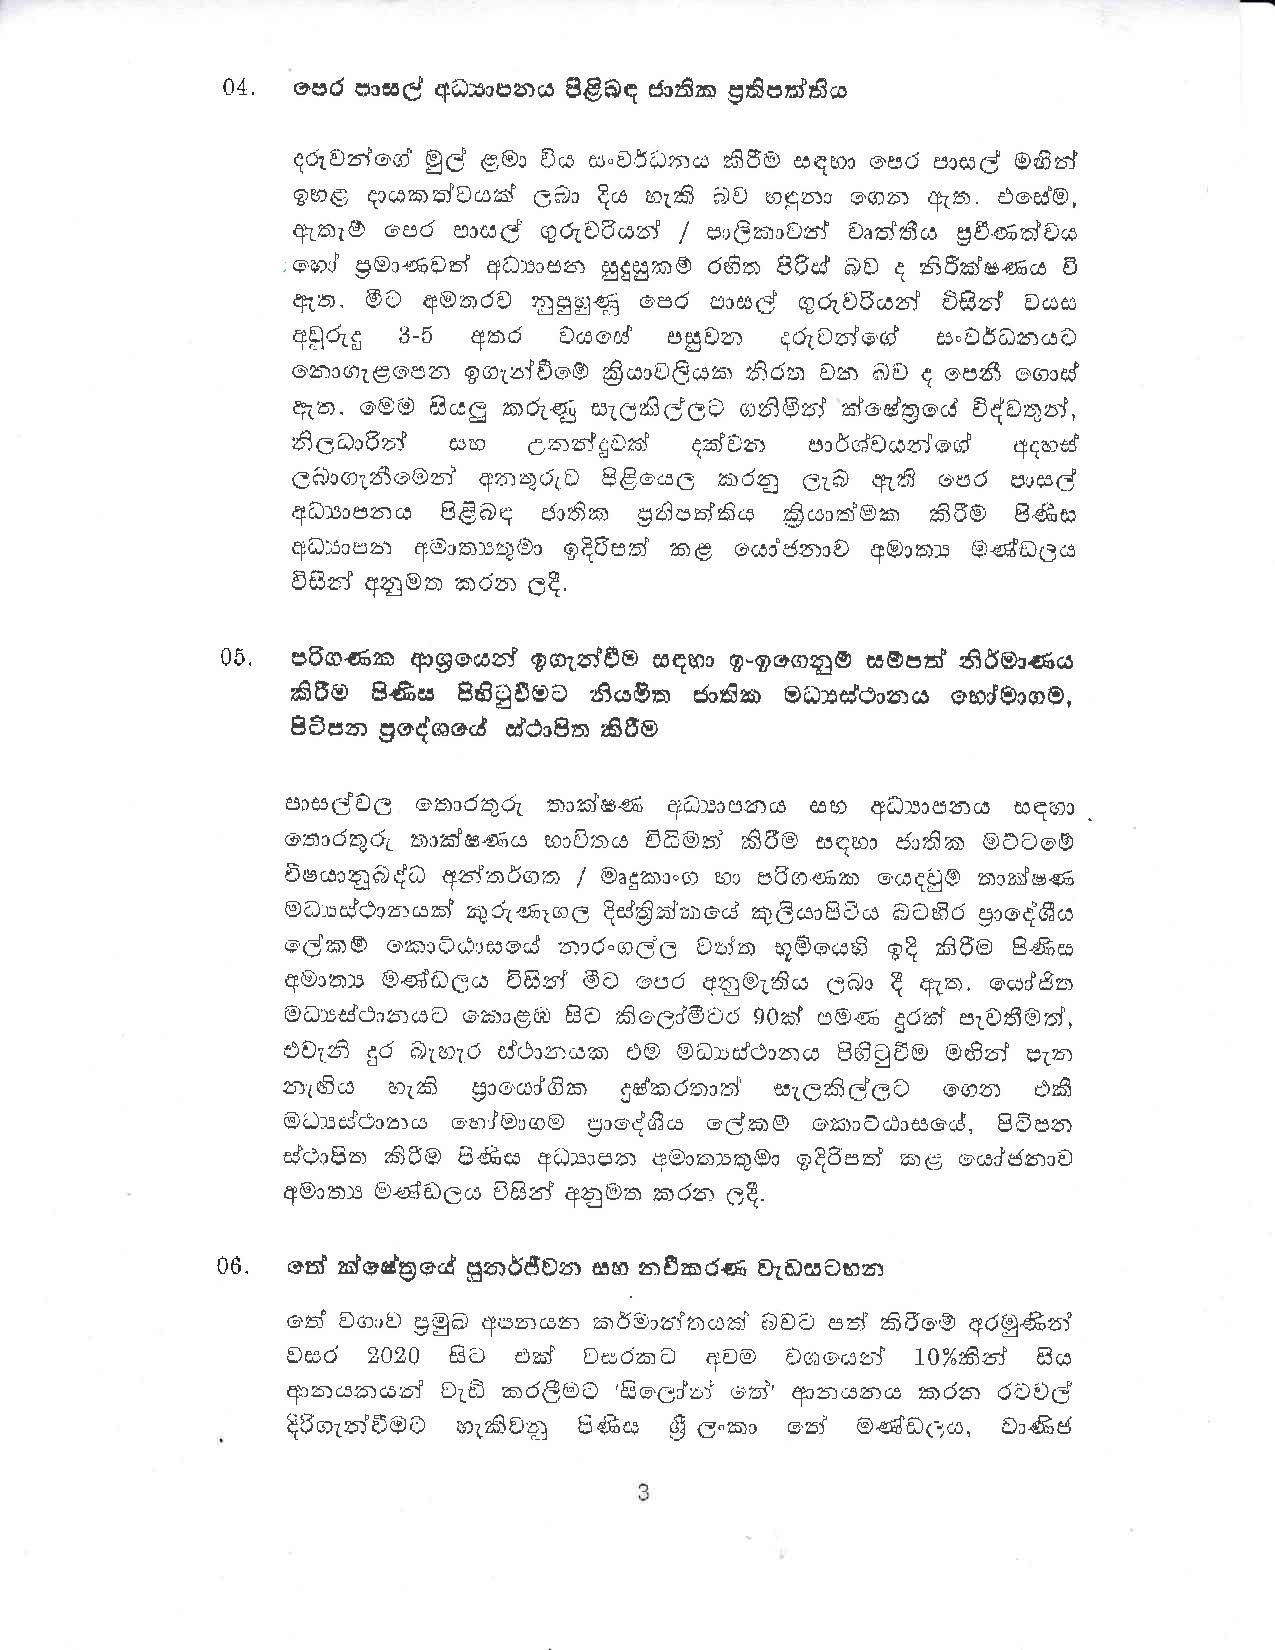 Cabinet Decision on 02.01.2020 page 003